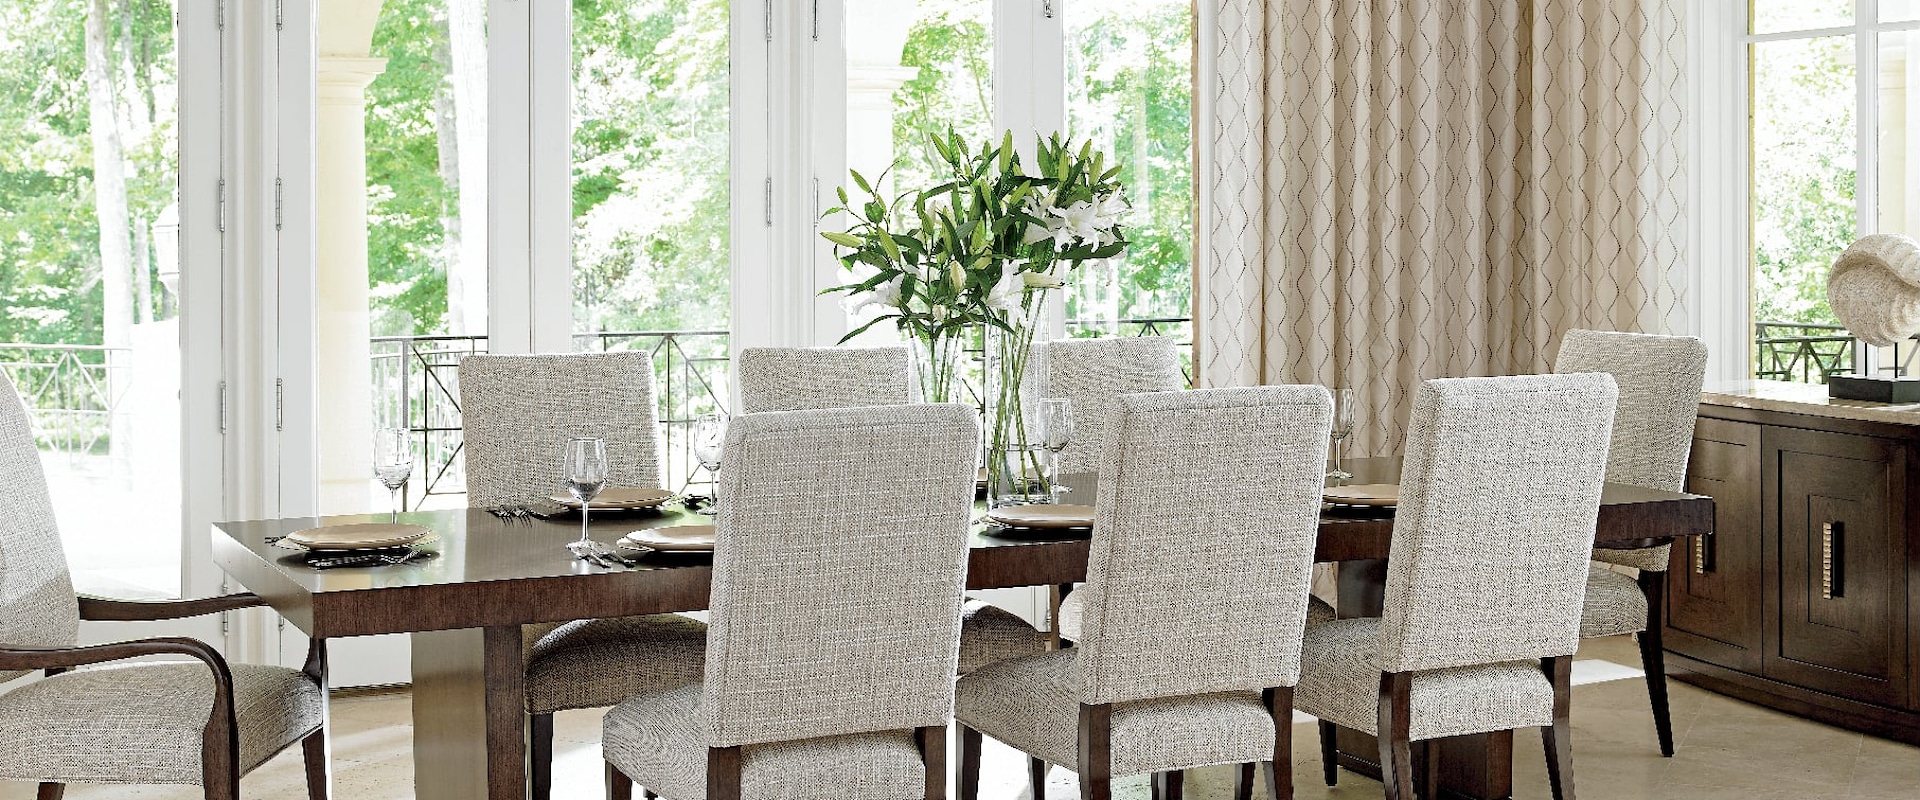 Nine Piece Dining Set with San Lorenzo Table and Married Fabric Sierra Chairs